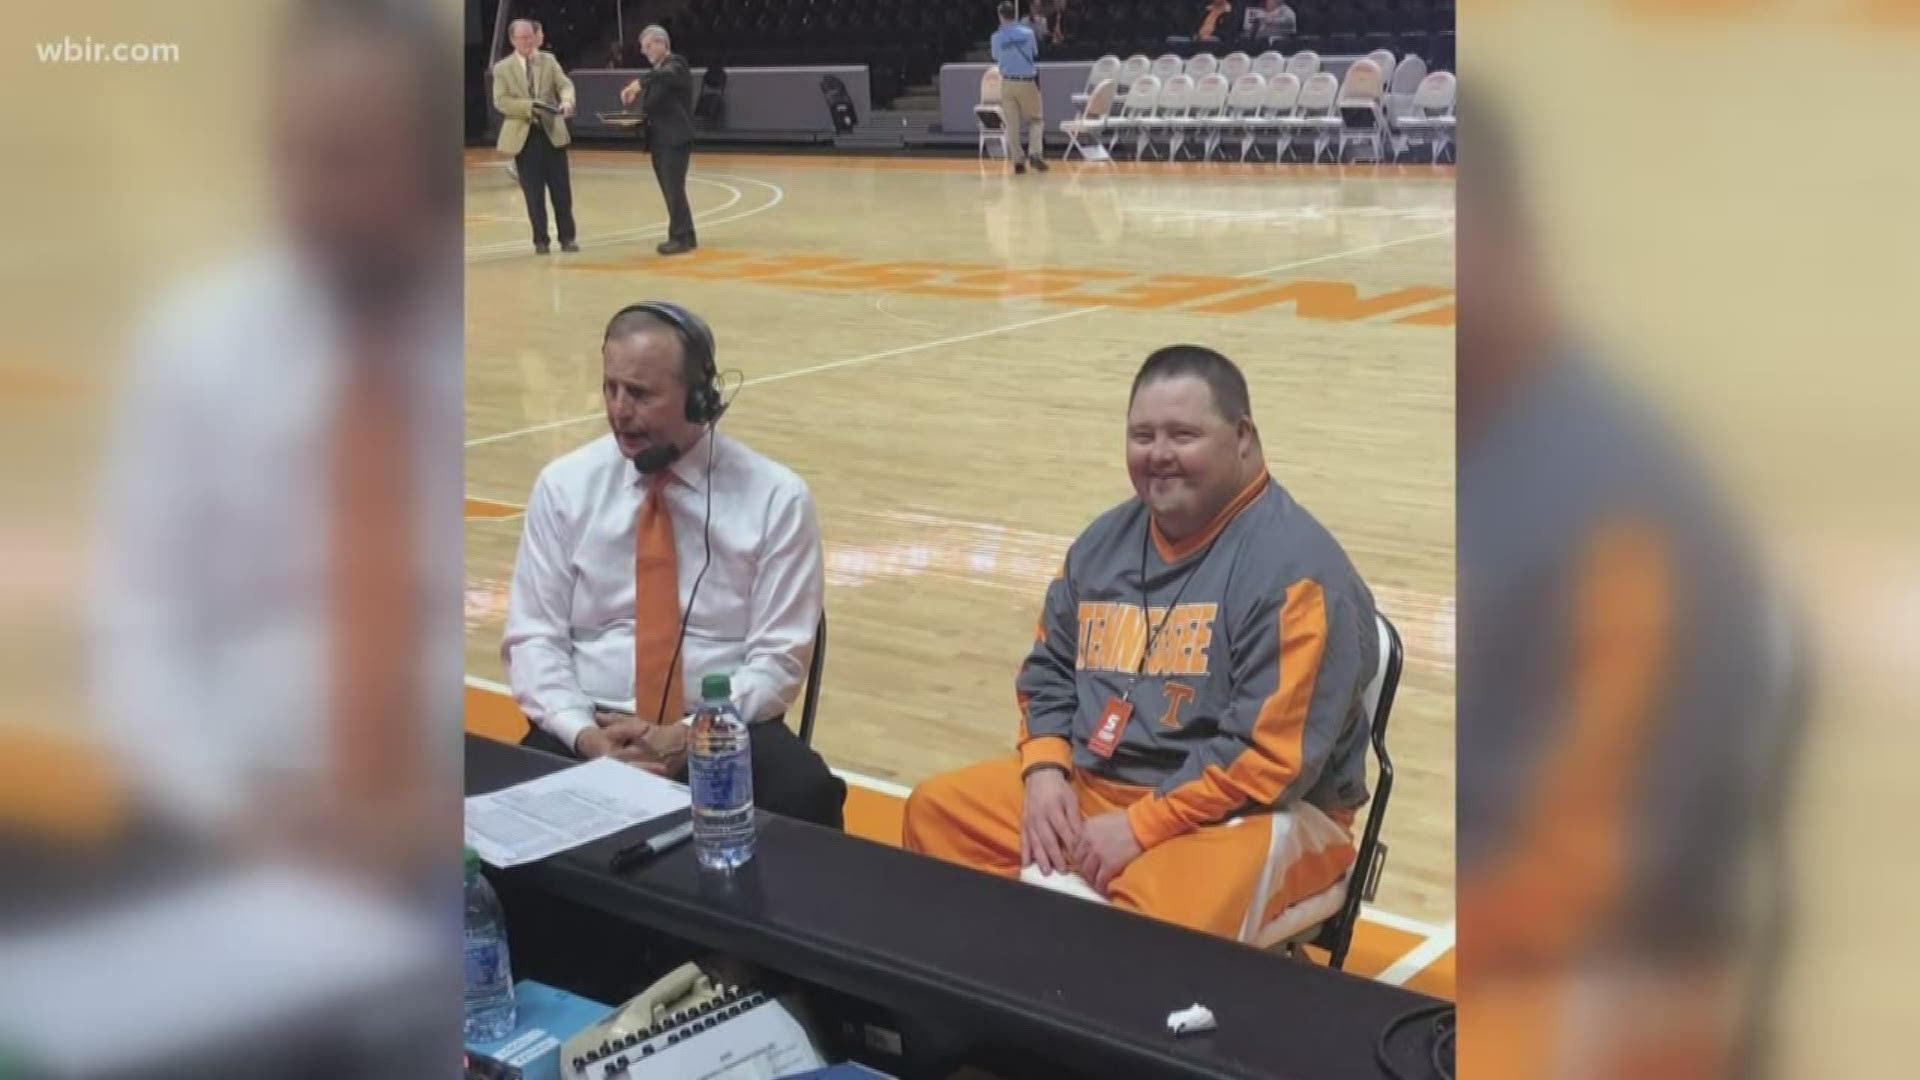 UT basketball coach Rick Barnes surprises a Sweetwater man with a night, working on the sidelines of their game against AL state. Nov. 21, 2019-4pm.